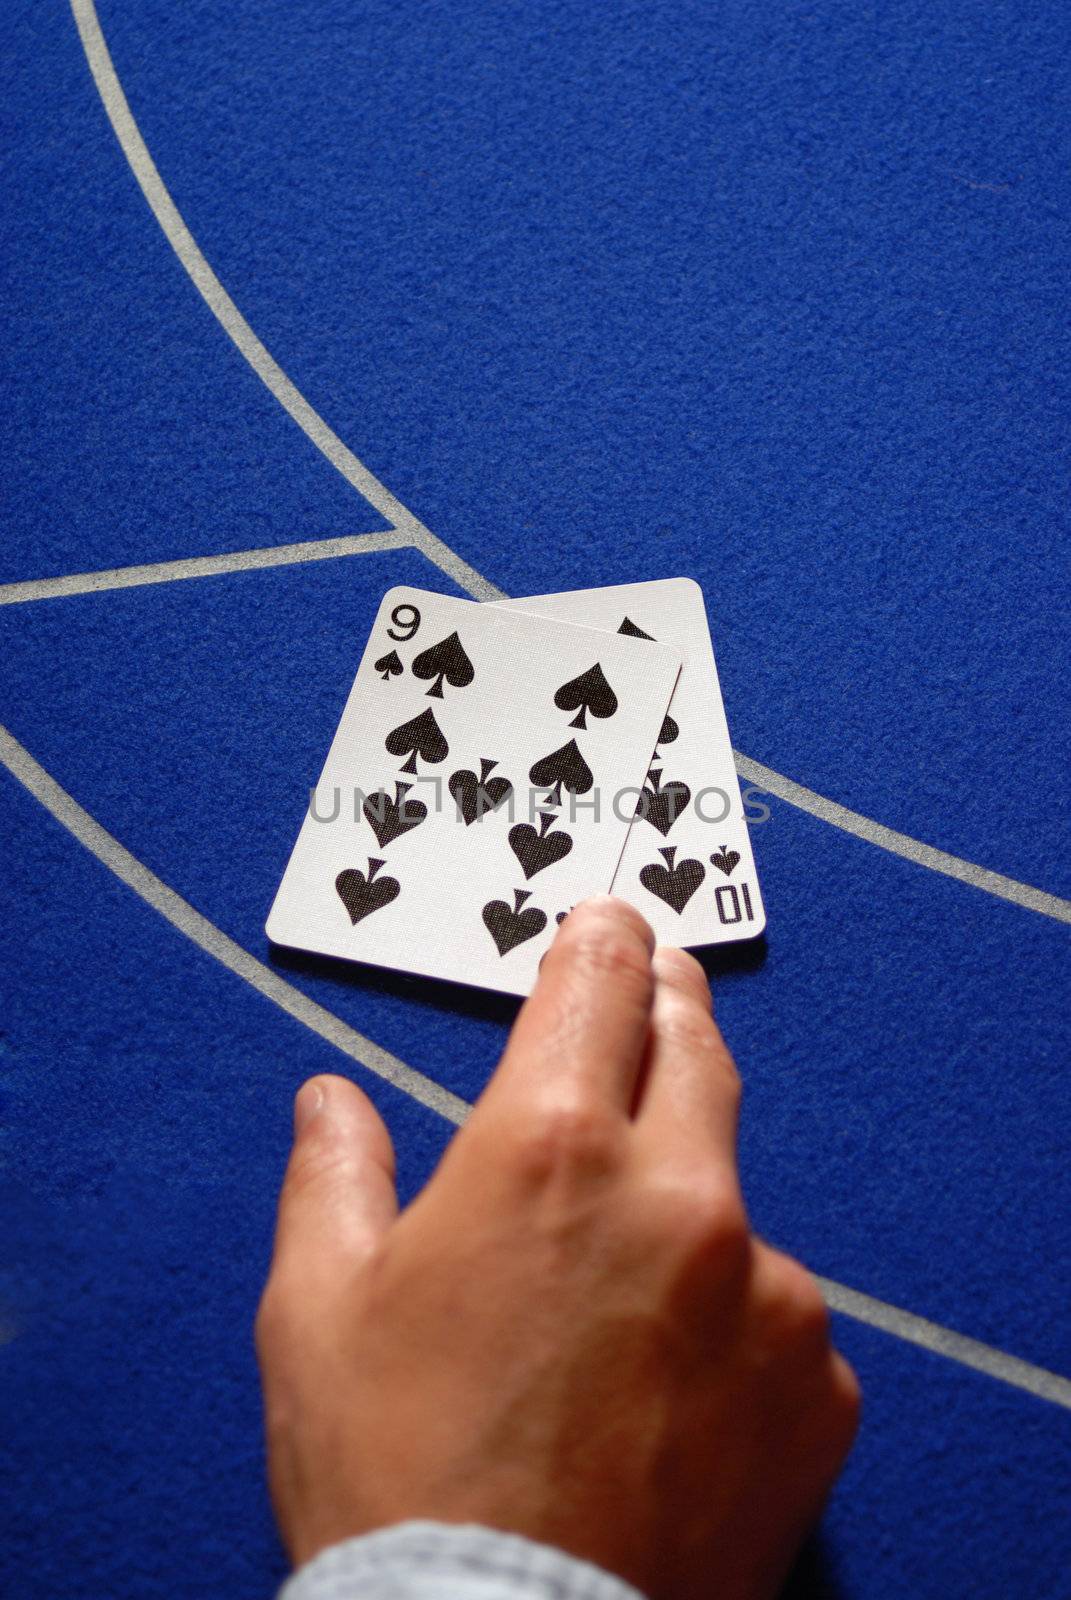 Two poker or baccarat cards on a Casino table. Male hand holding them